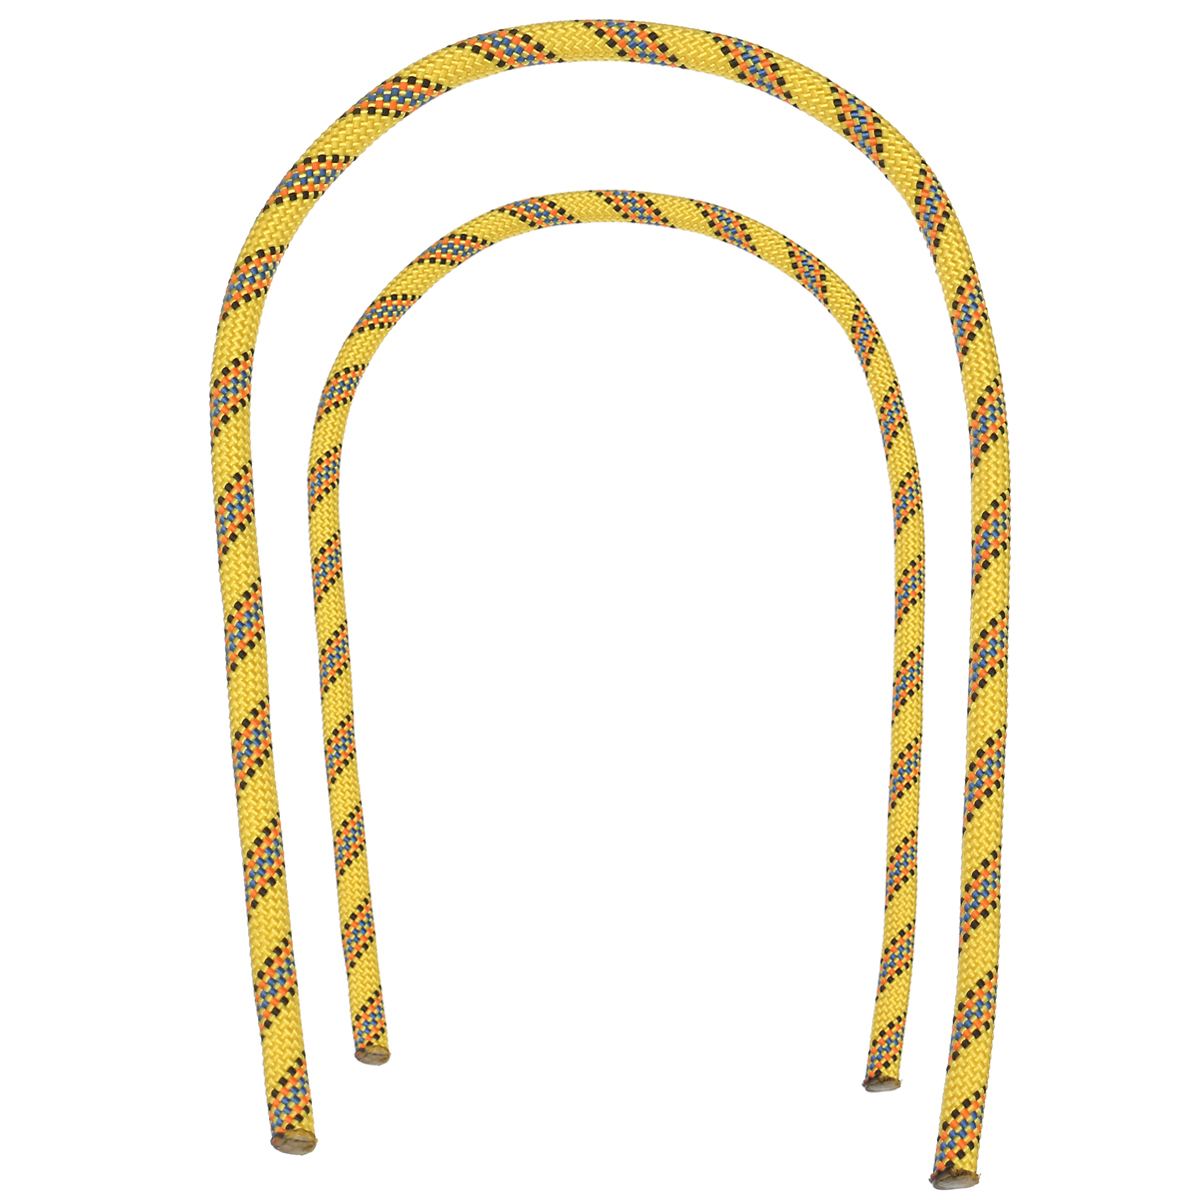 18inch24inch-8mm-Resistant-Prusik-Cord-Rope-Loop-Arborist-Rock-Climbing-Rescue-Caving-1443379-7